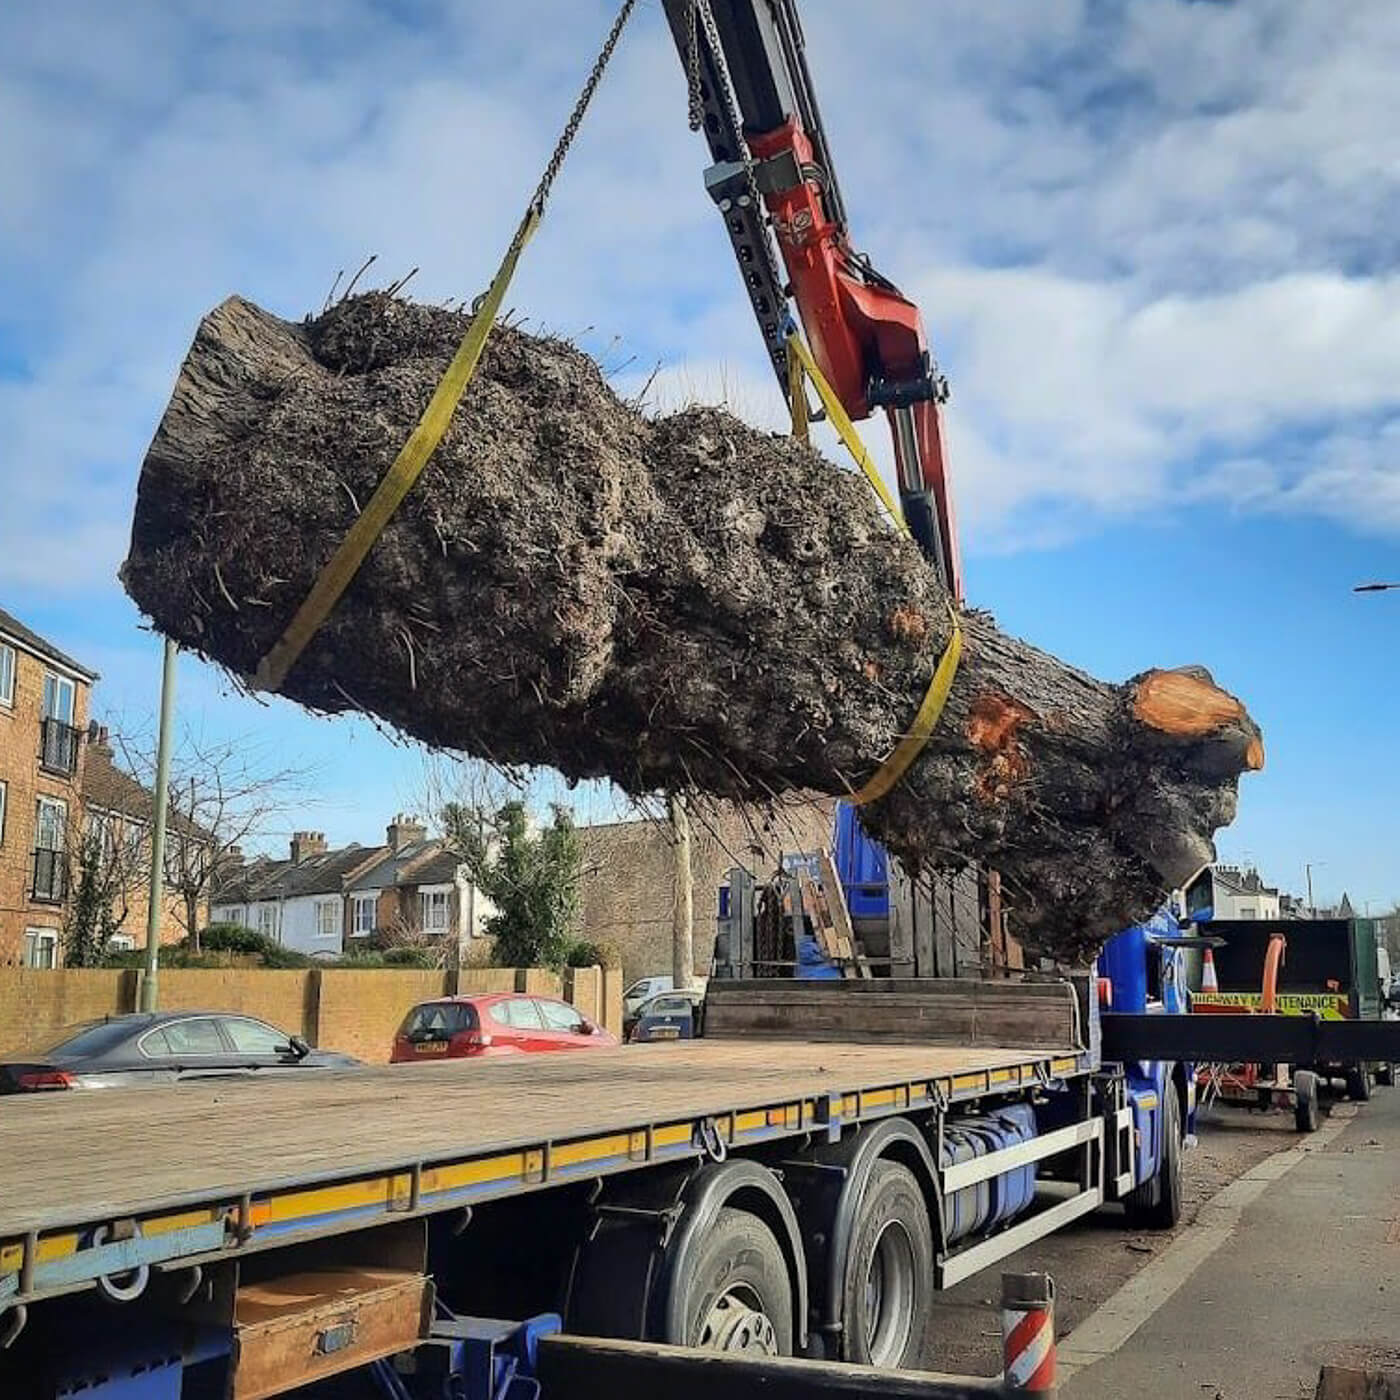 Felled horse Chestnut tree trunk being loaded onto lorry with crane 